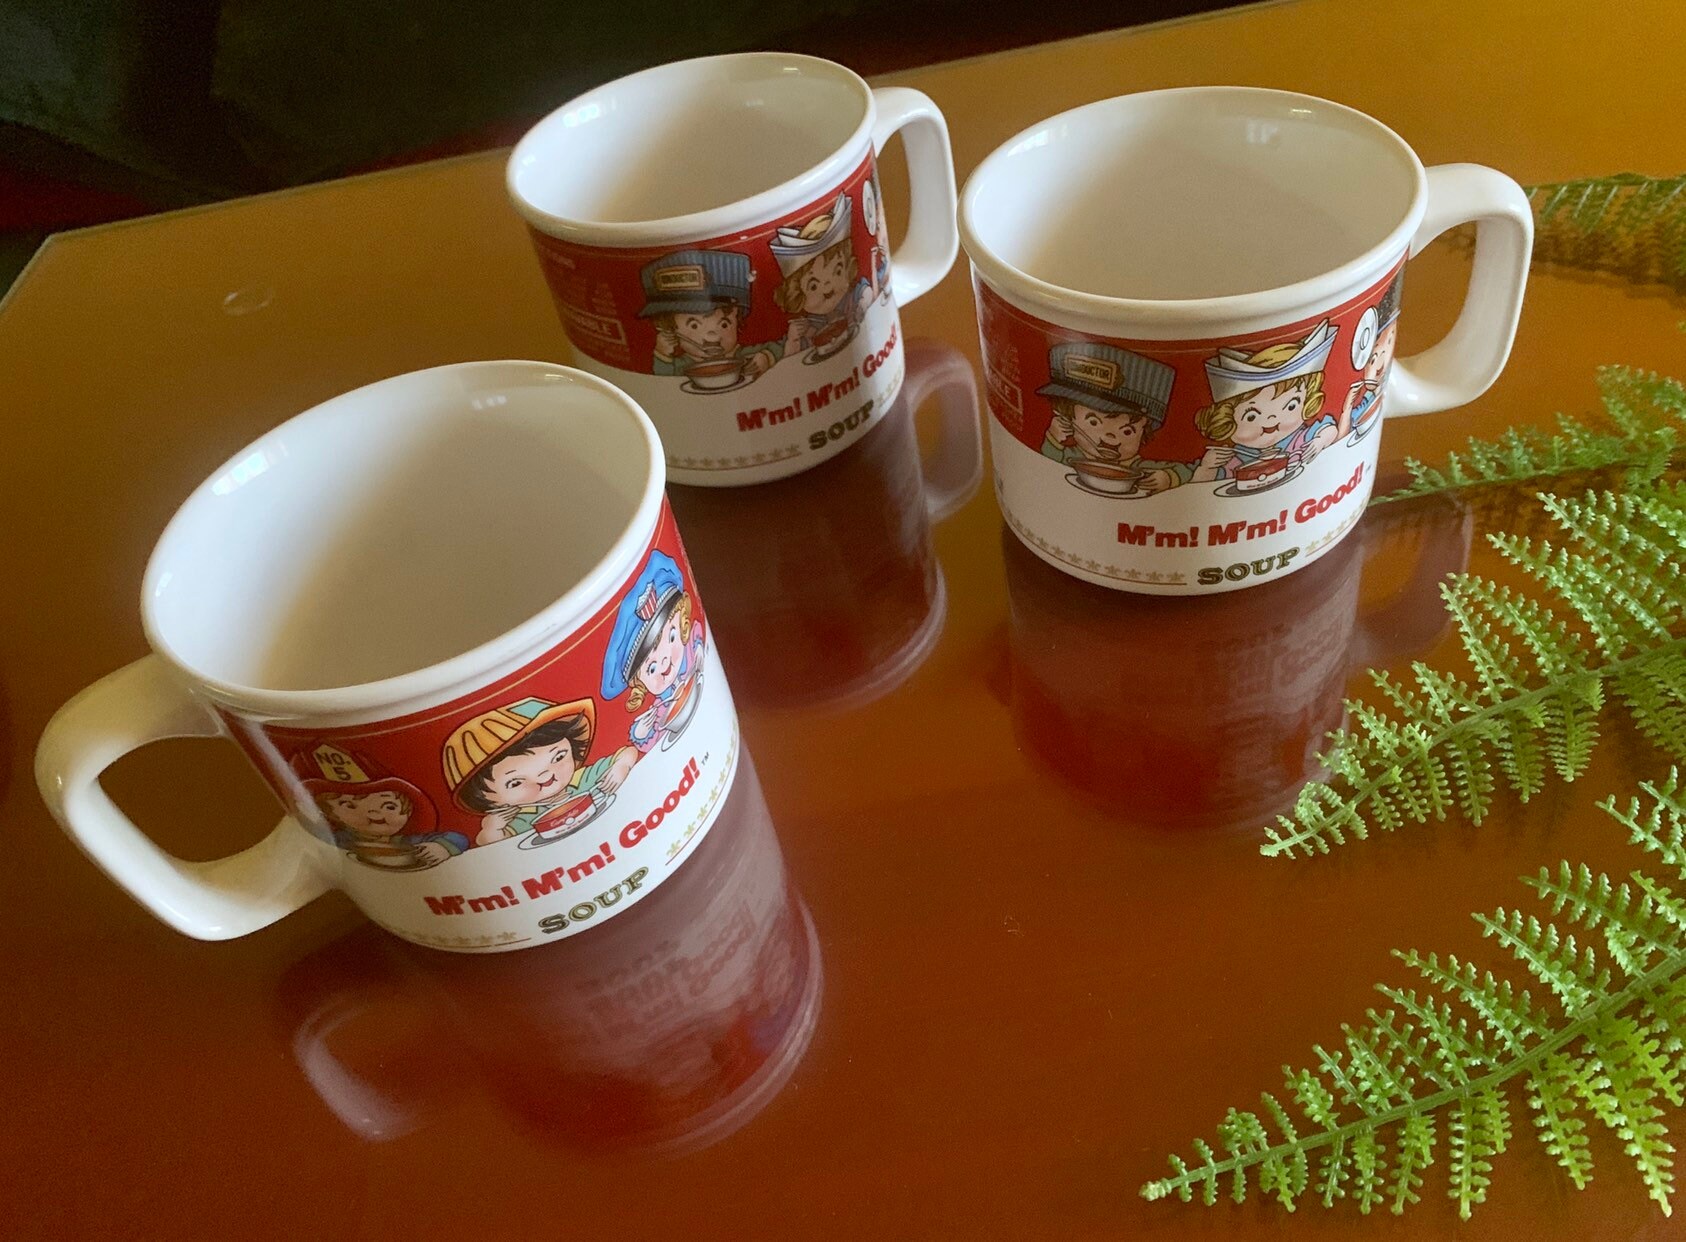 CAMPBELL 1990 SOUP KIDS MUGS RED & WHITE SET OF 4 CHILDREN COOKING